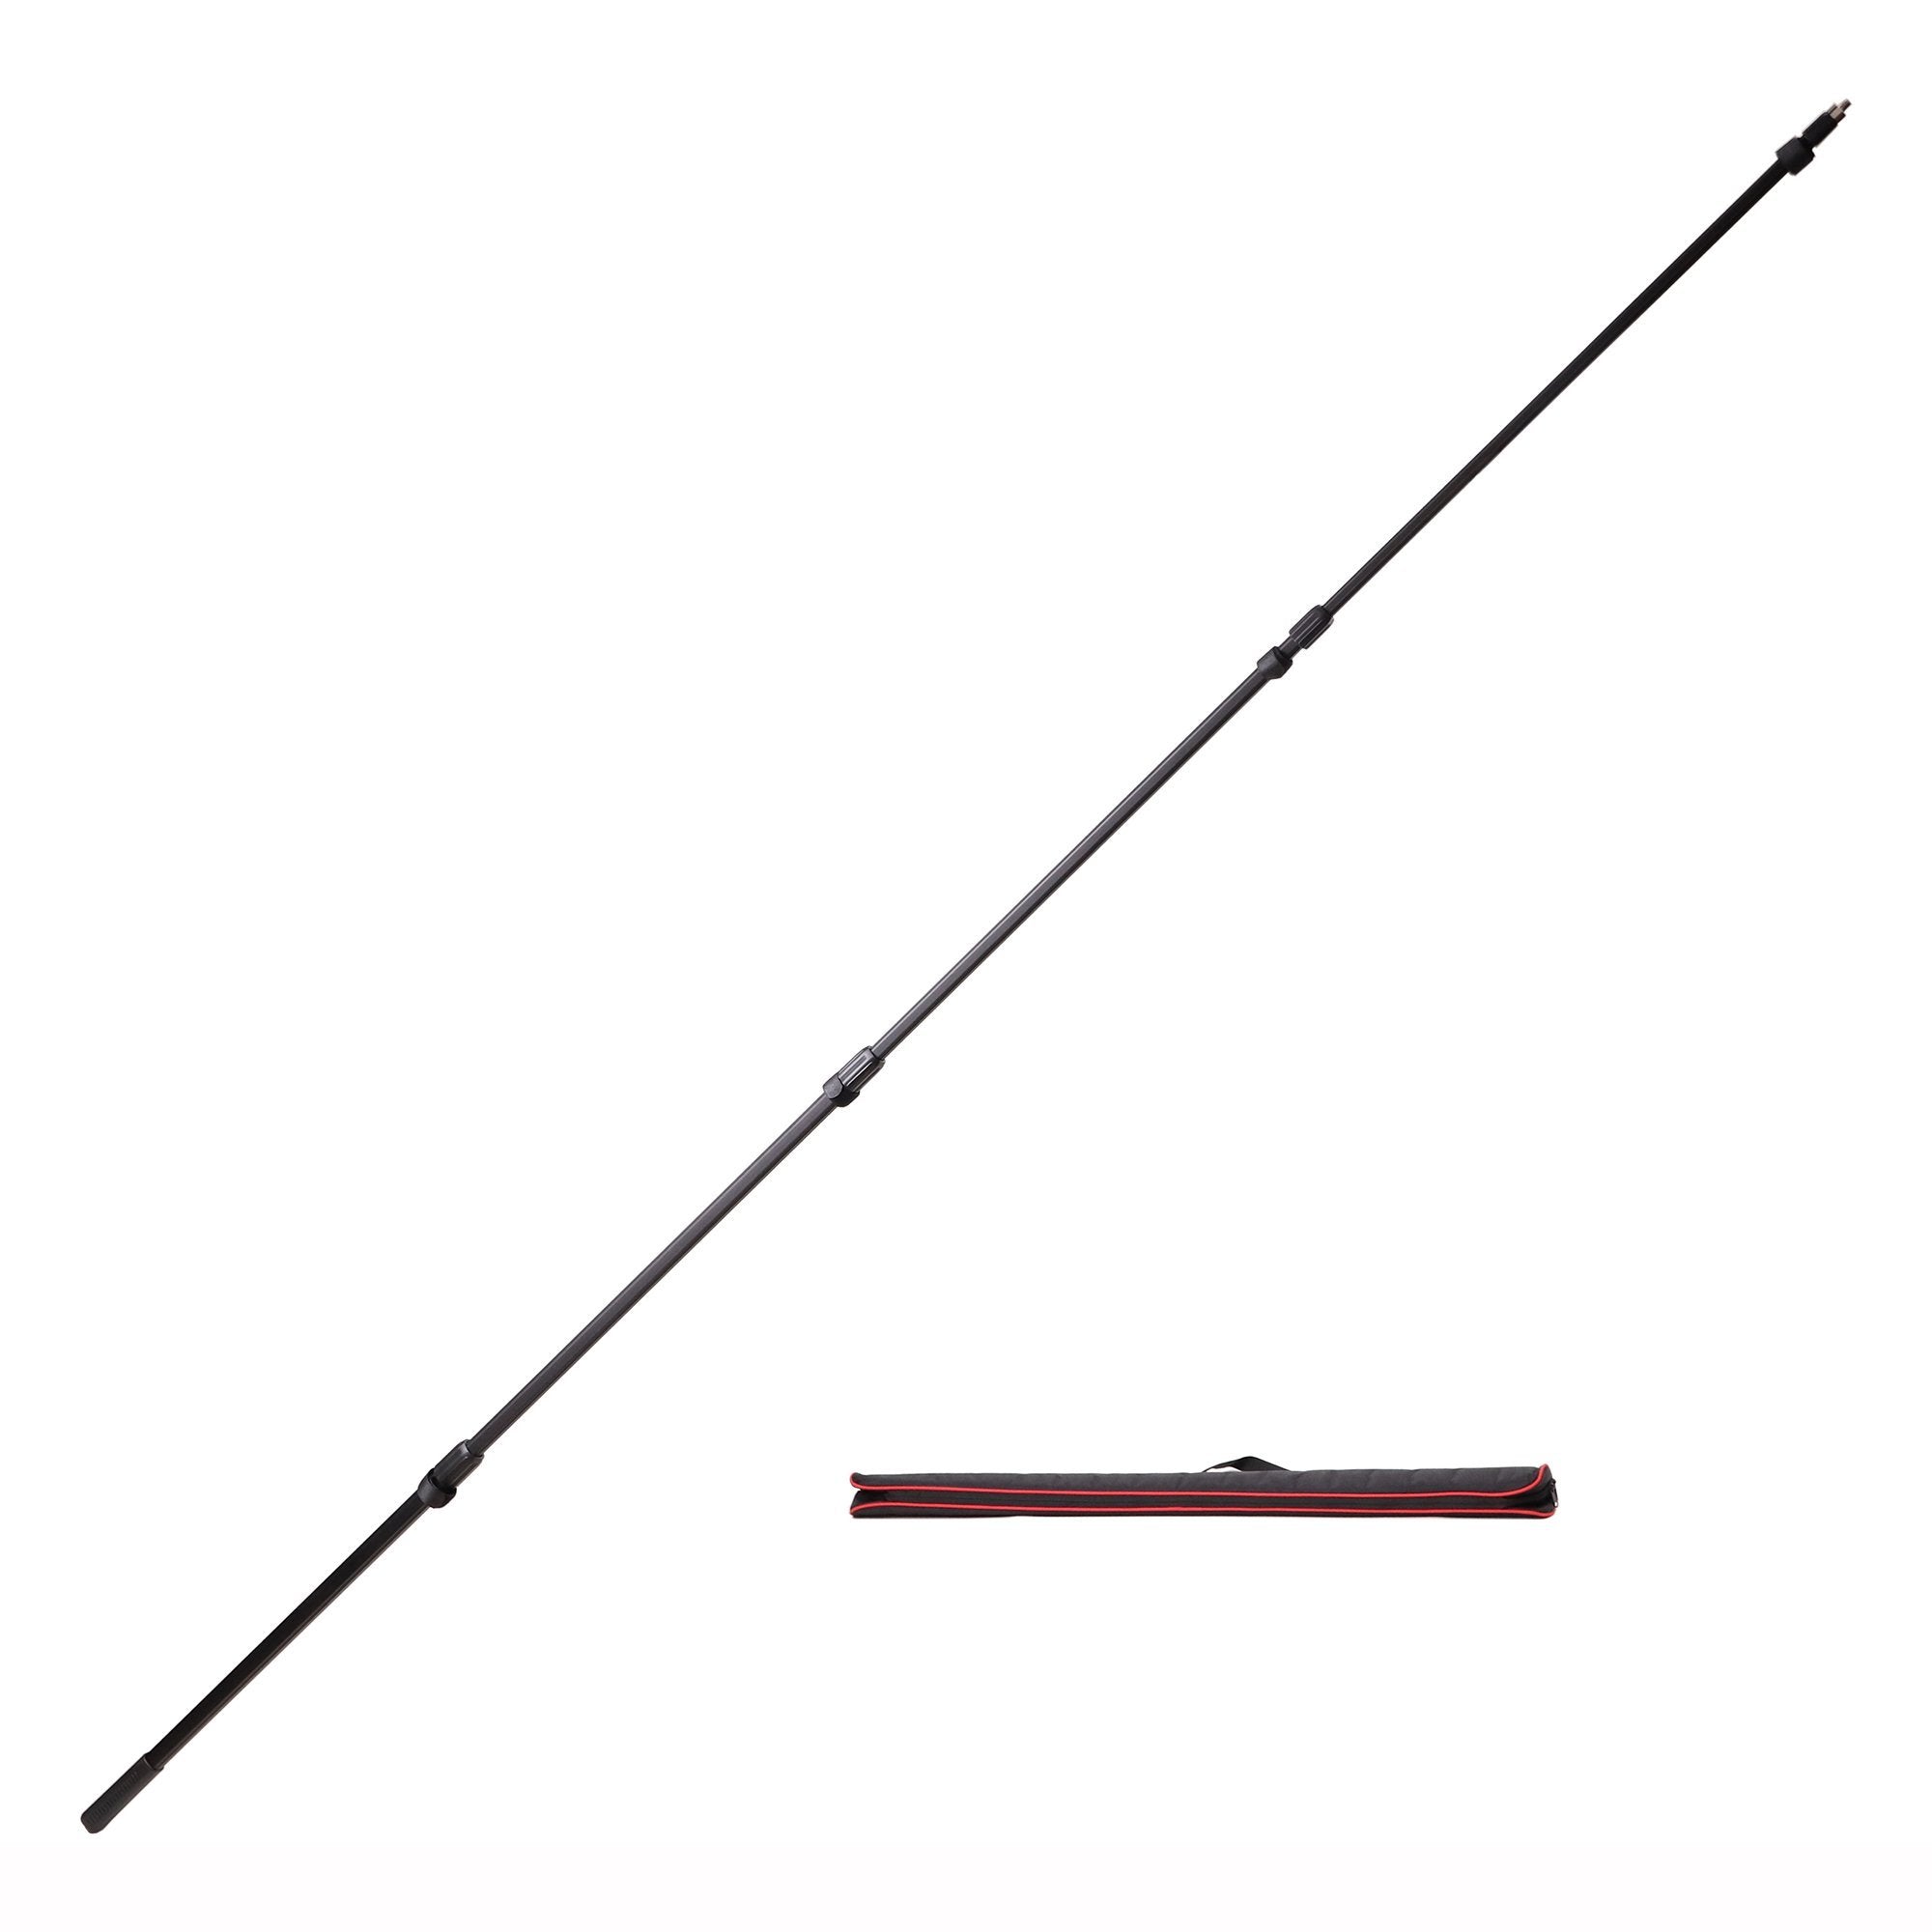 SALE 10 Foot Telescopic Boom Pole, 4 Sections with Cable Straps, 3/8 & 5/8 in Threads